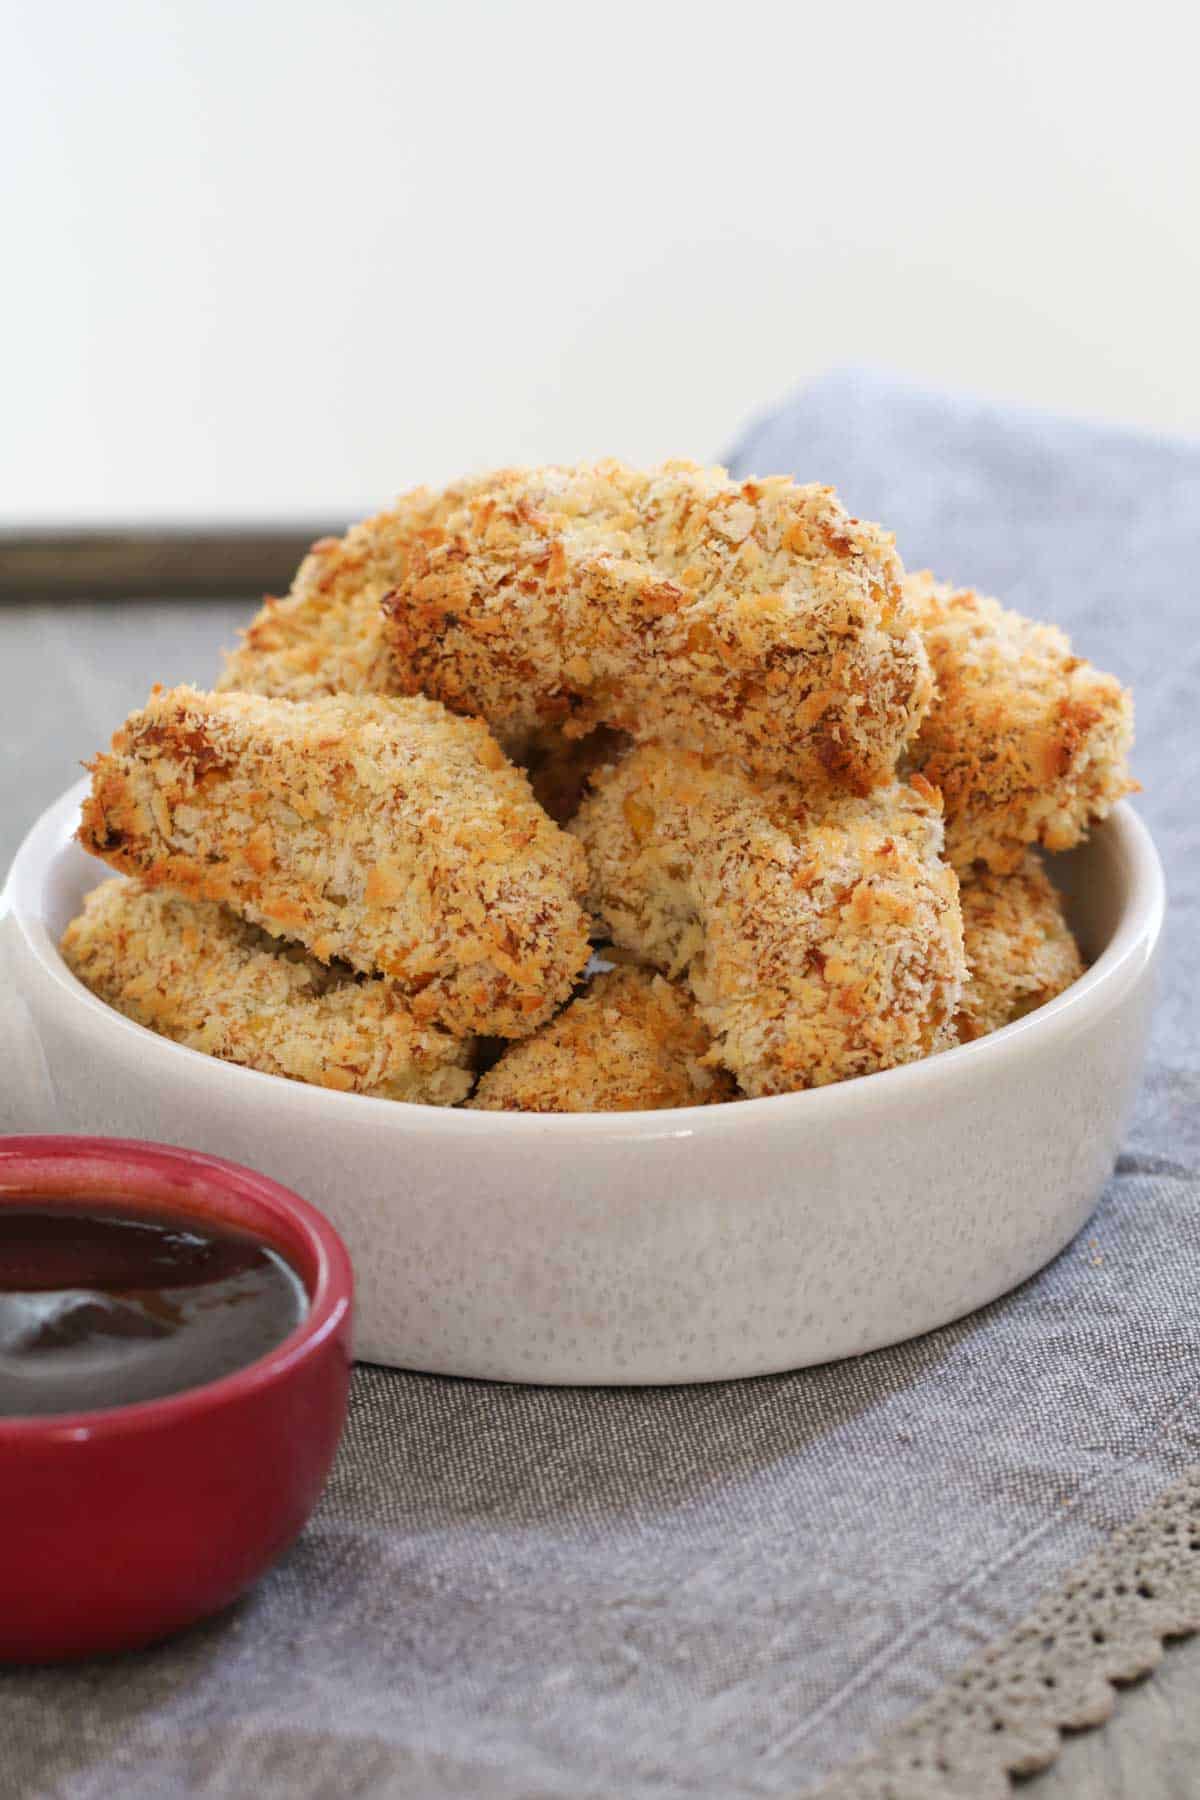 A white bowl containing chicken and veggie nuggets coated in crunchy breadcrumbs.